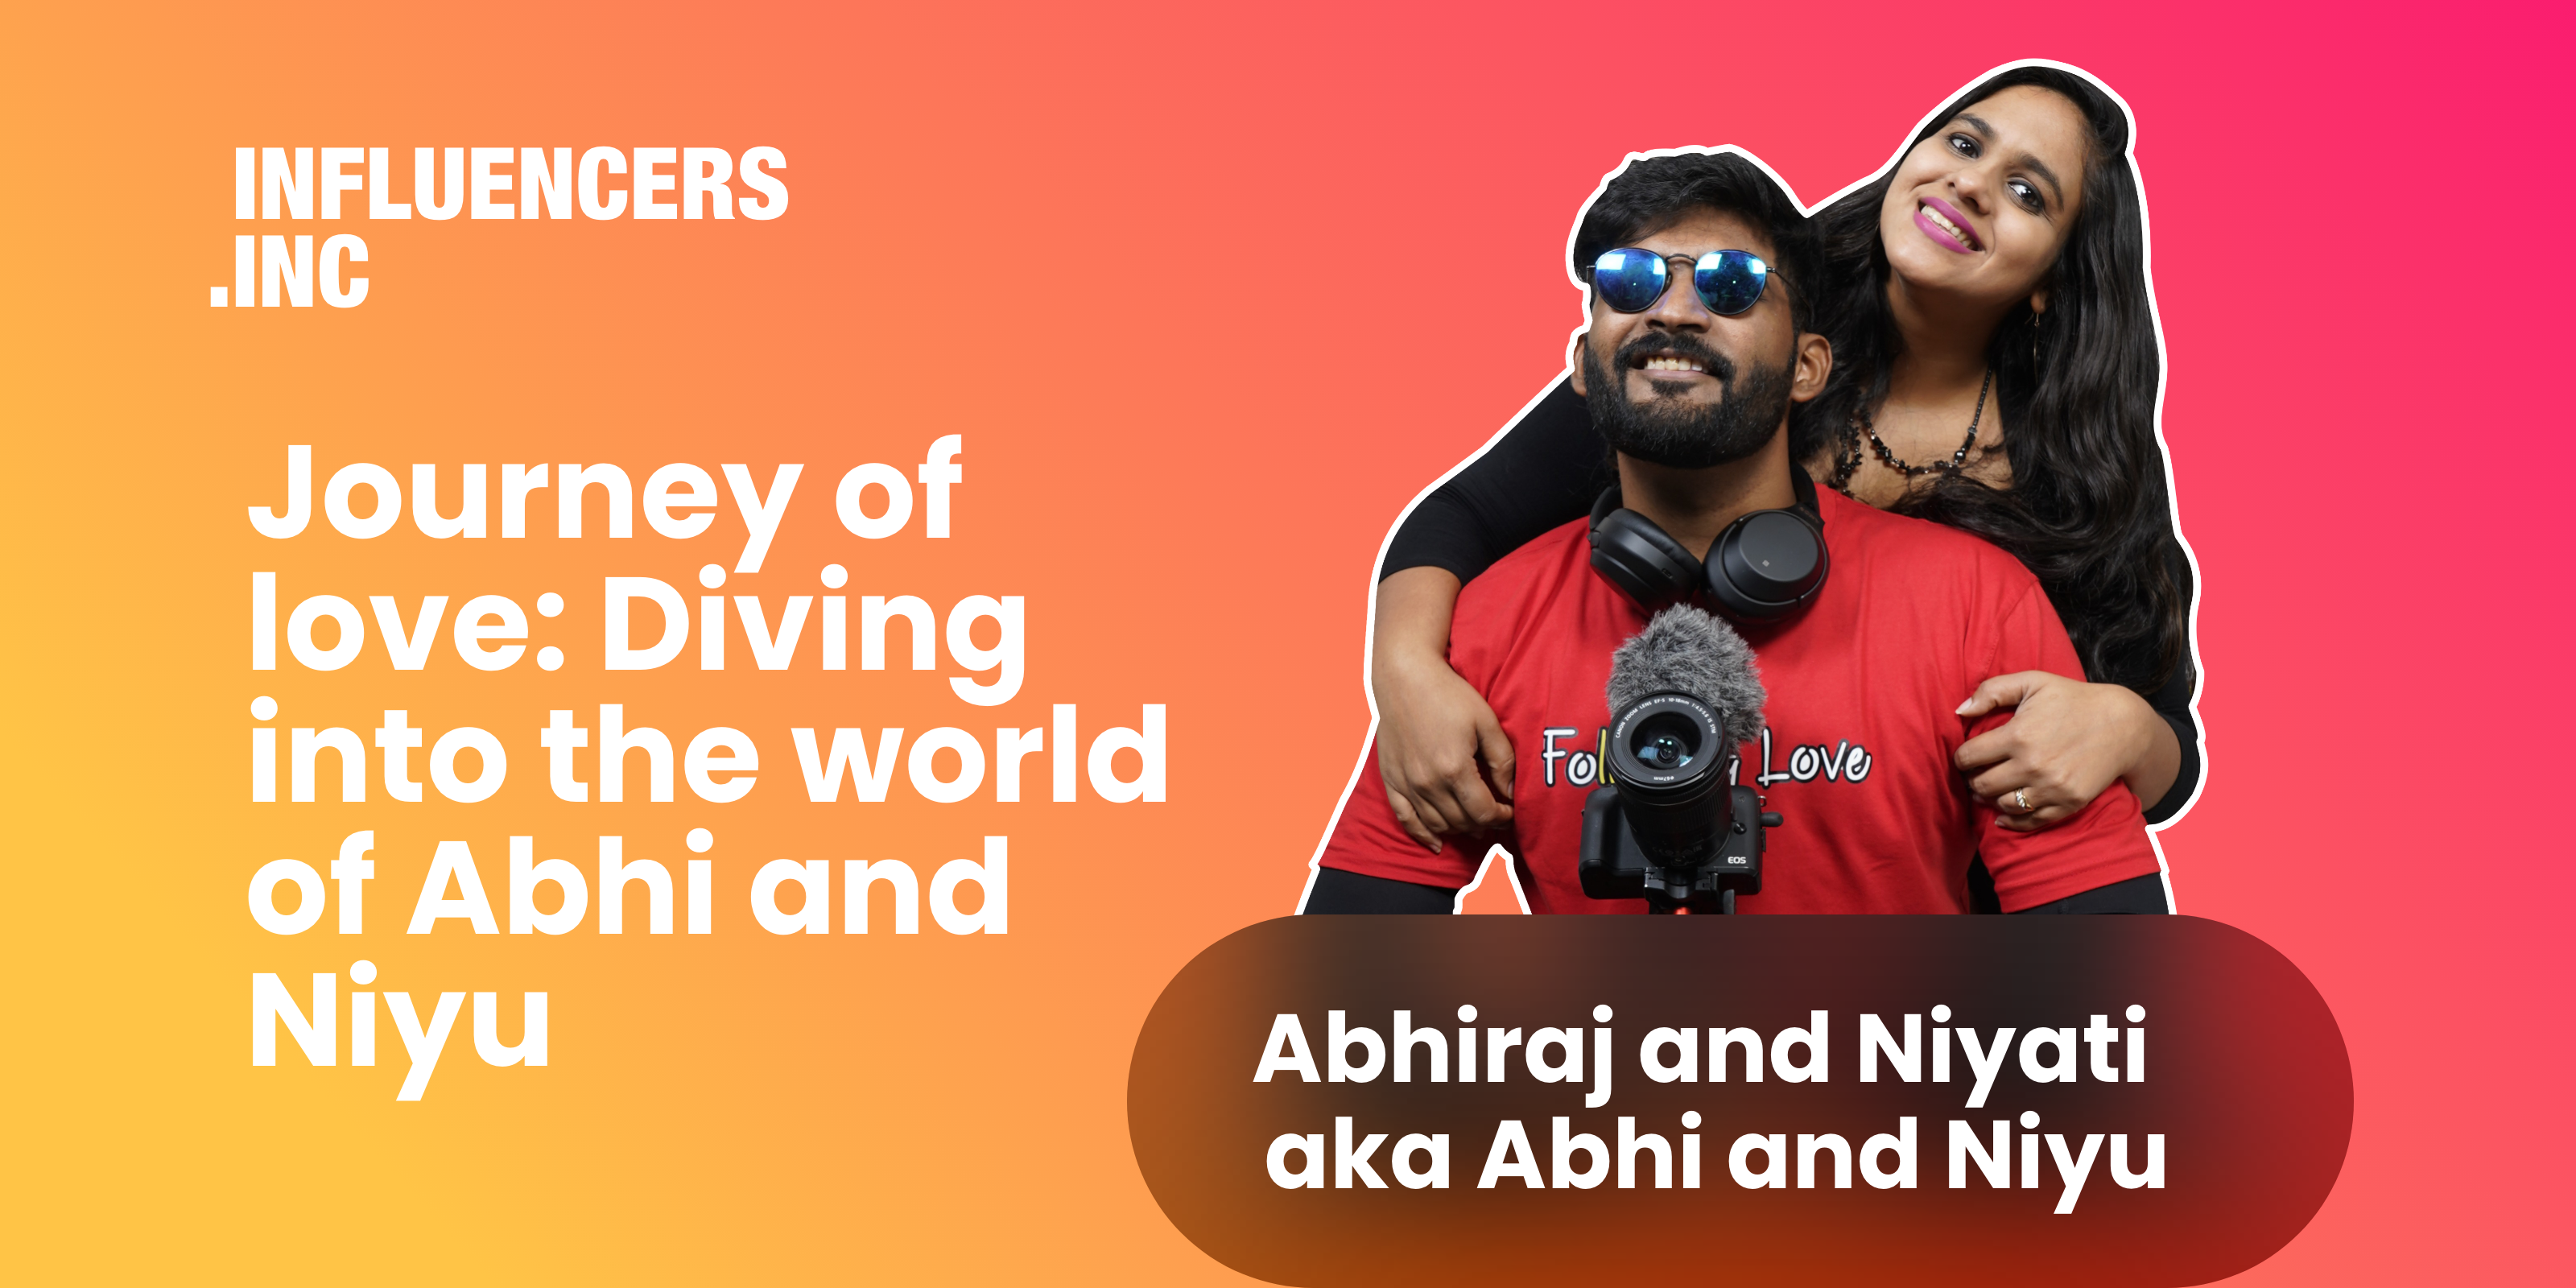 With 1.9M YouTube followers, how digital influencers Abhi and Niyu are creating content for a better world